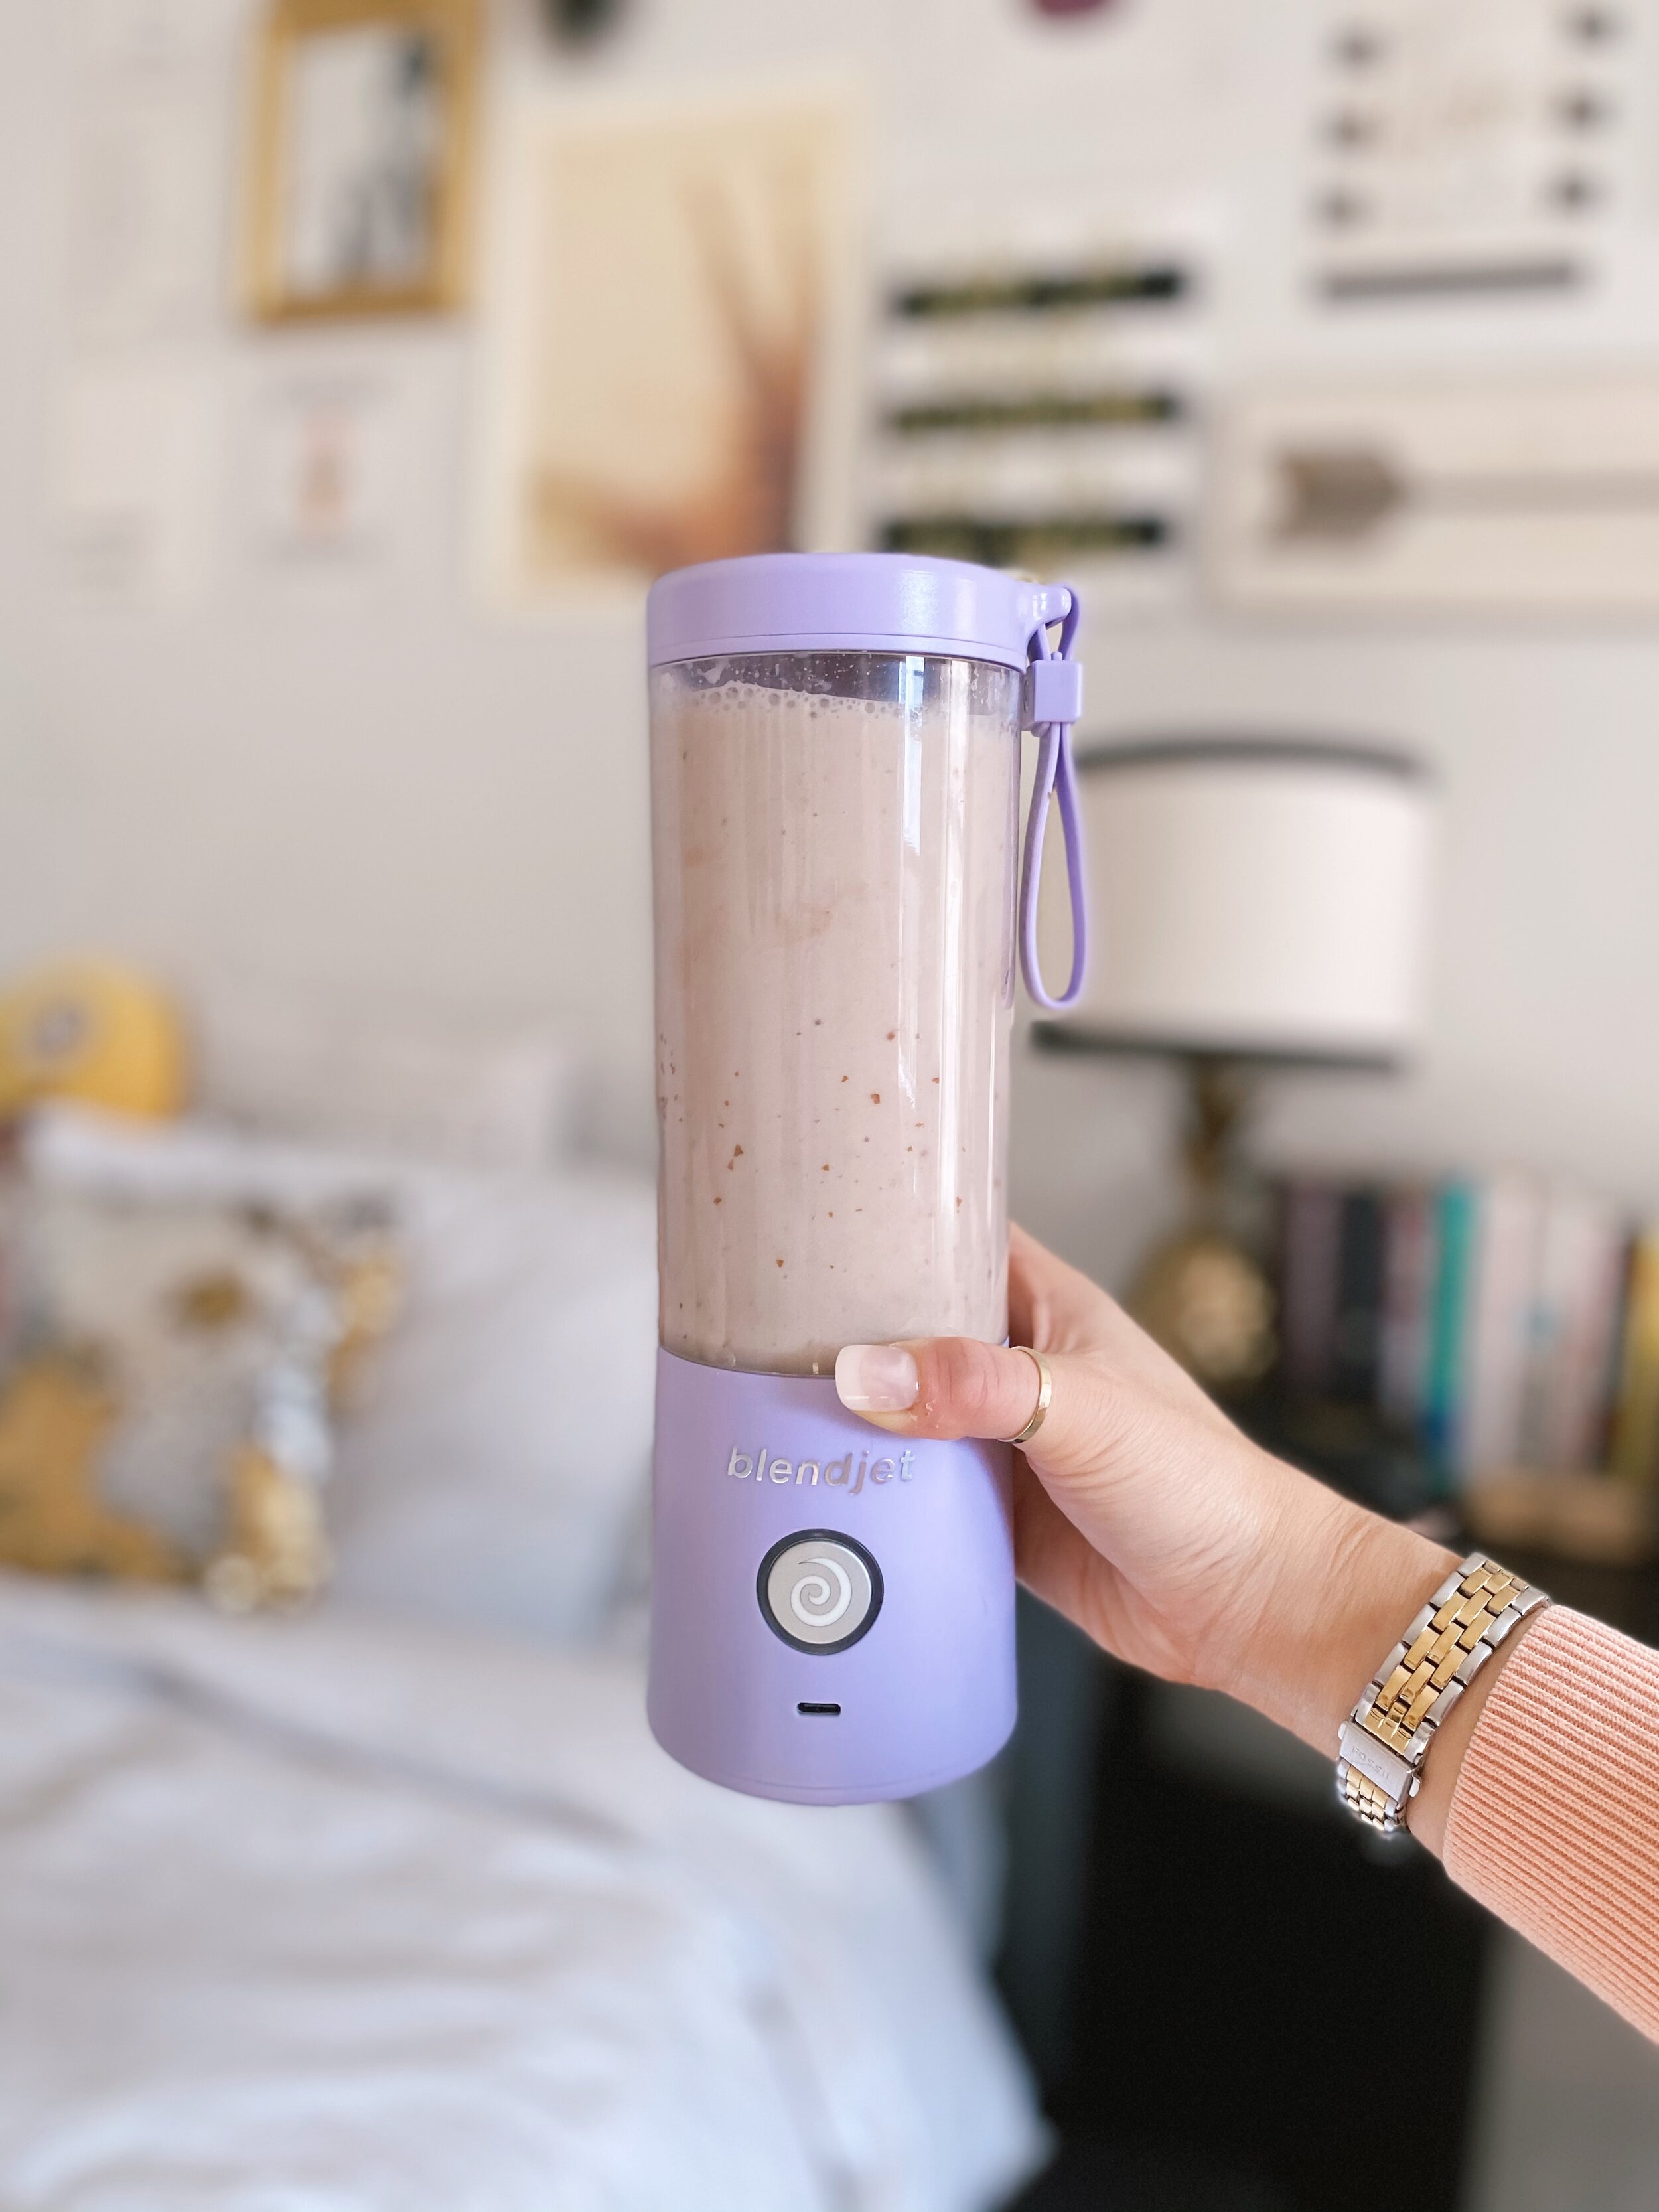 BlendJet Smoothie Recipes We Are Obsessing Over